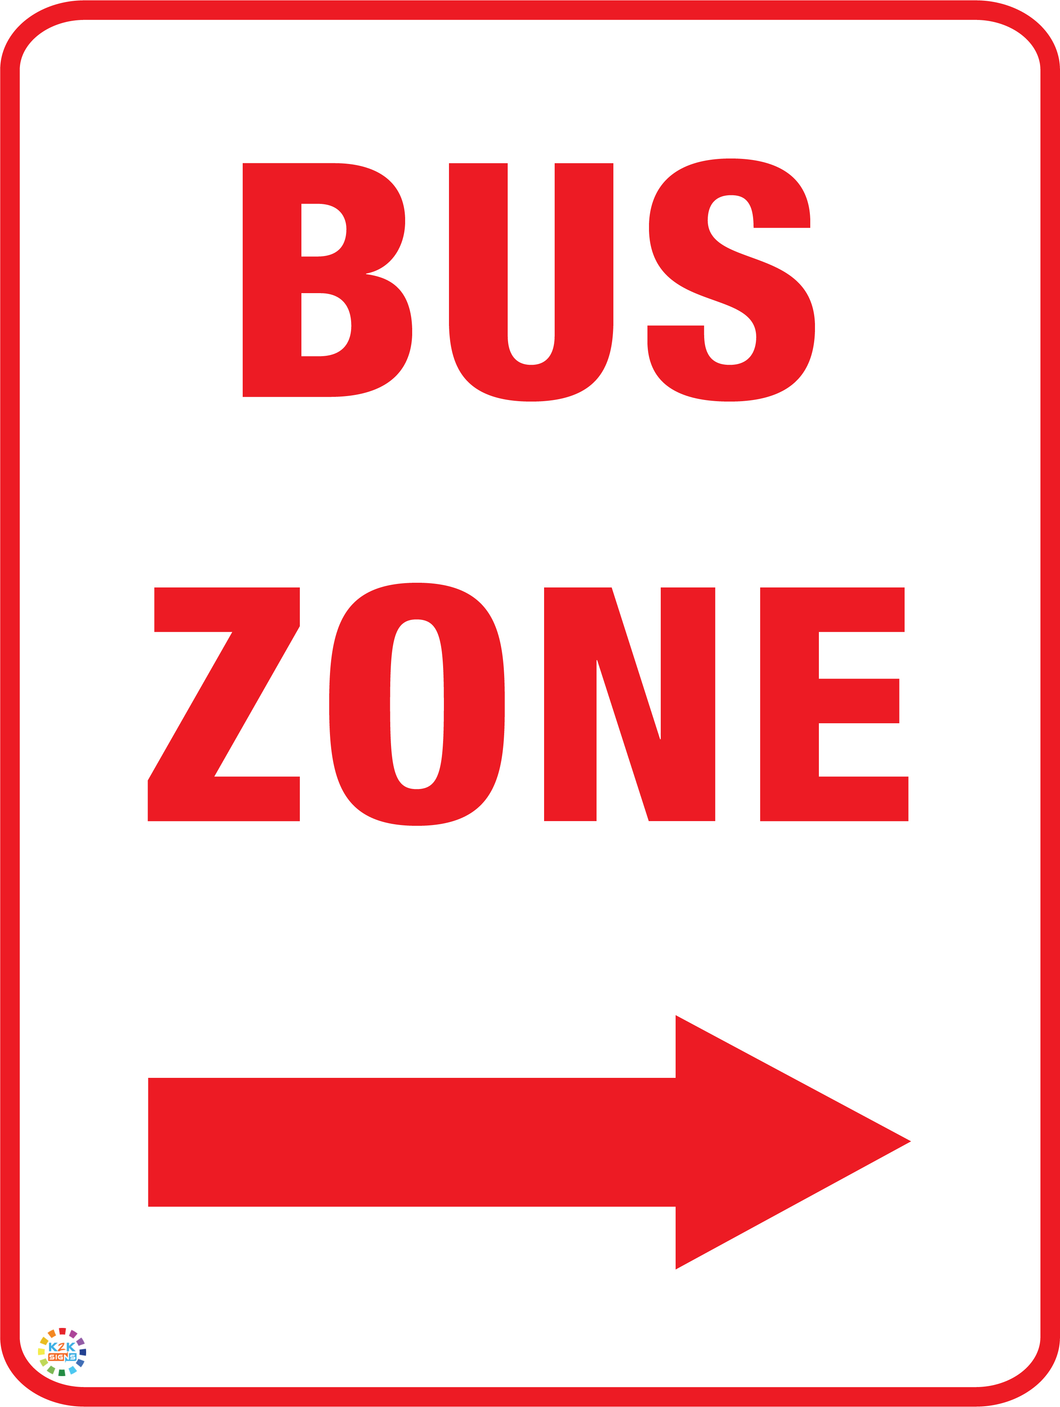 Bus Zone (Right Arrow) Sign